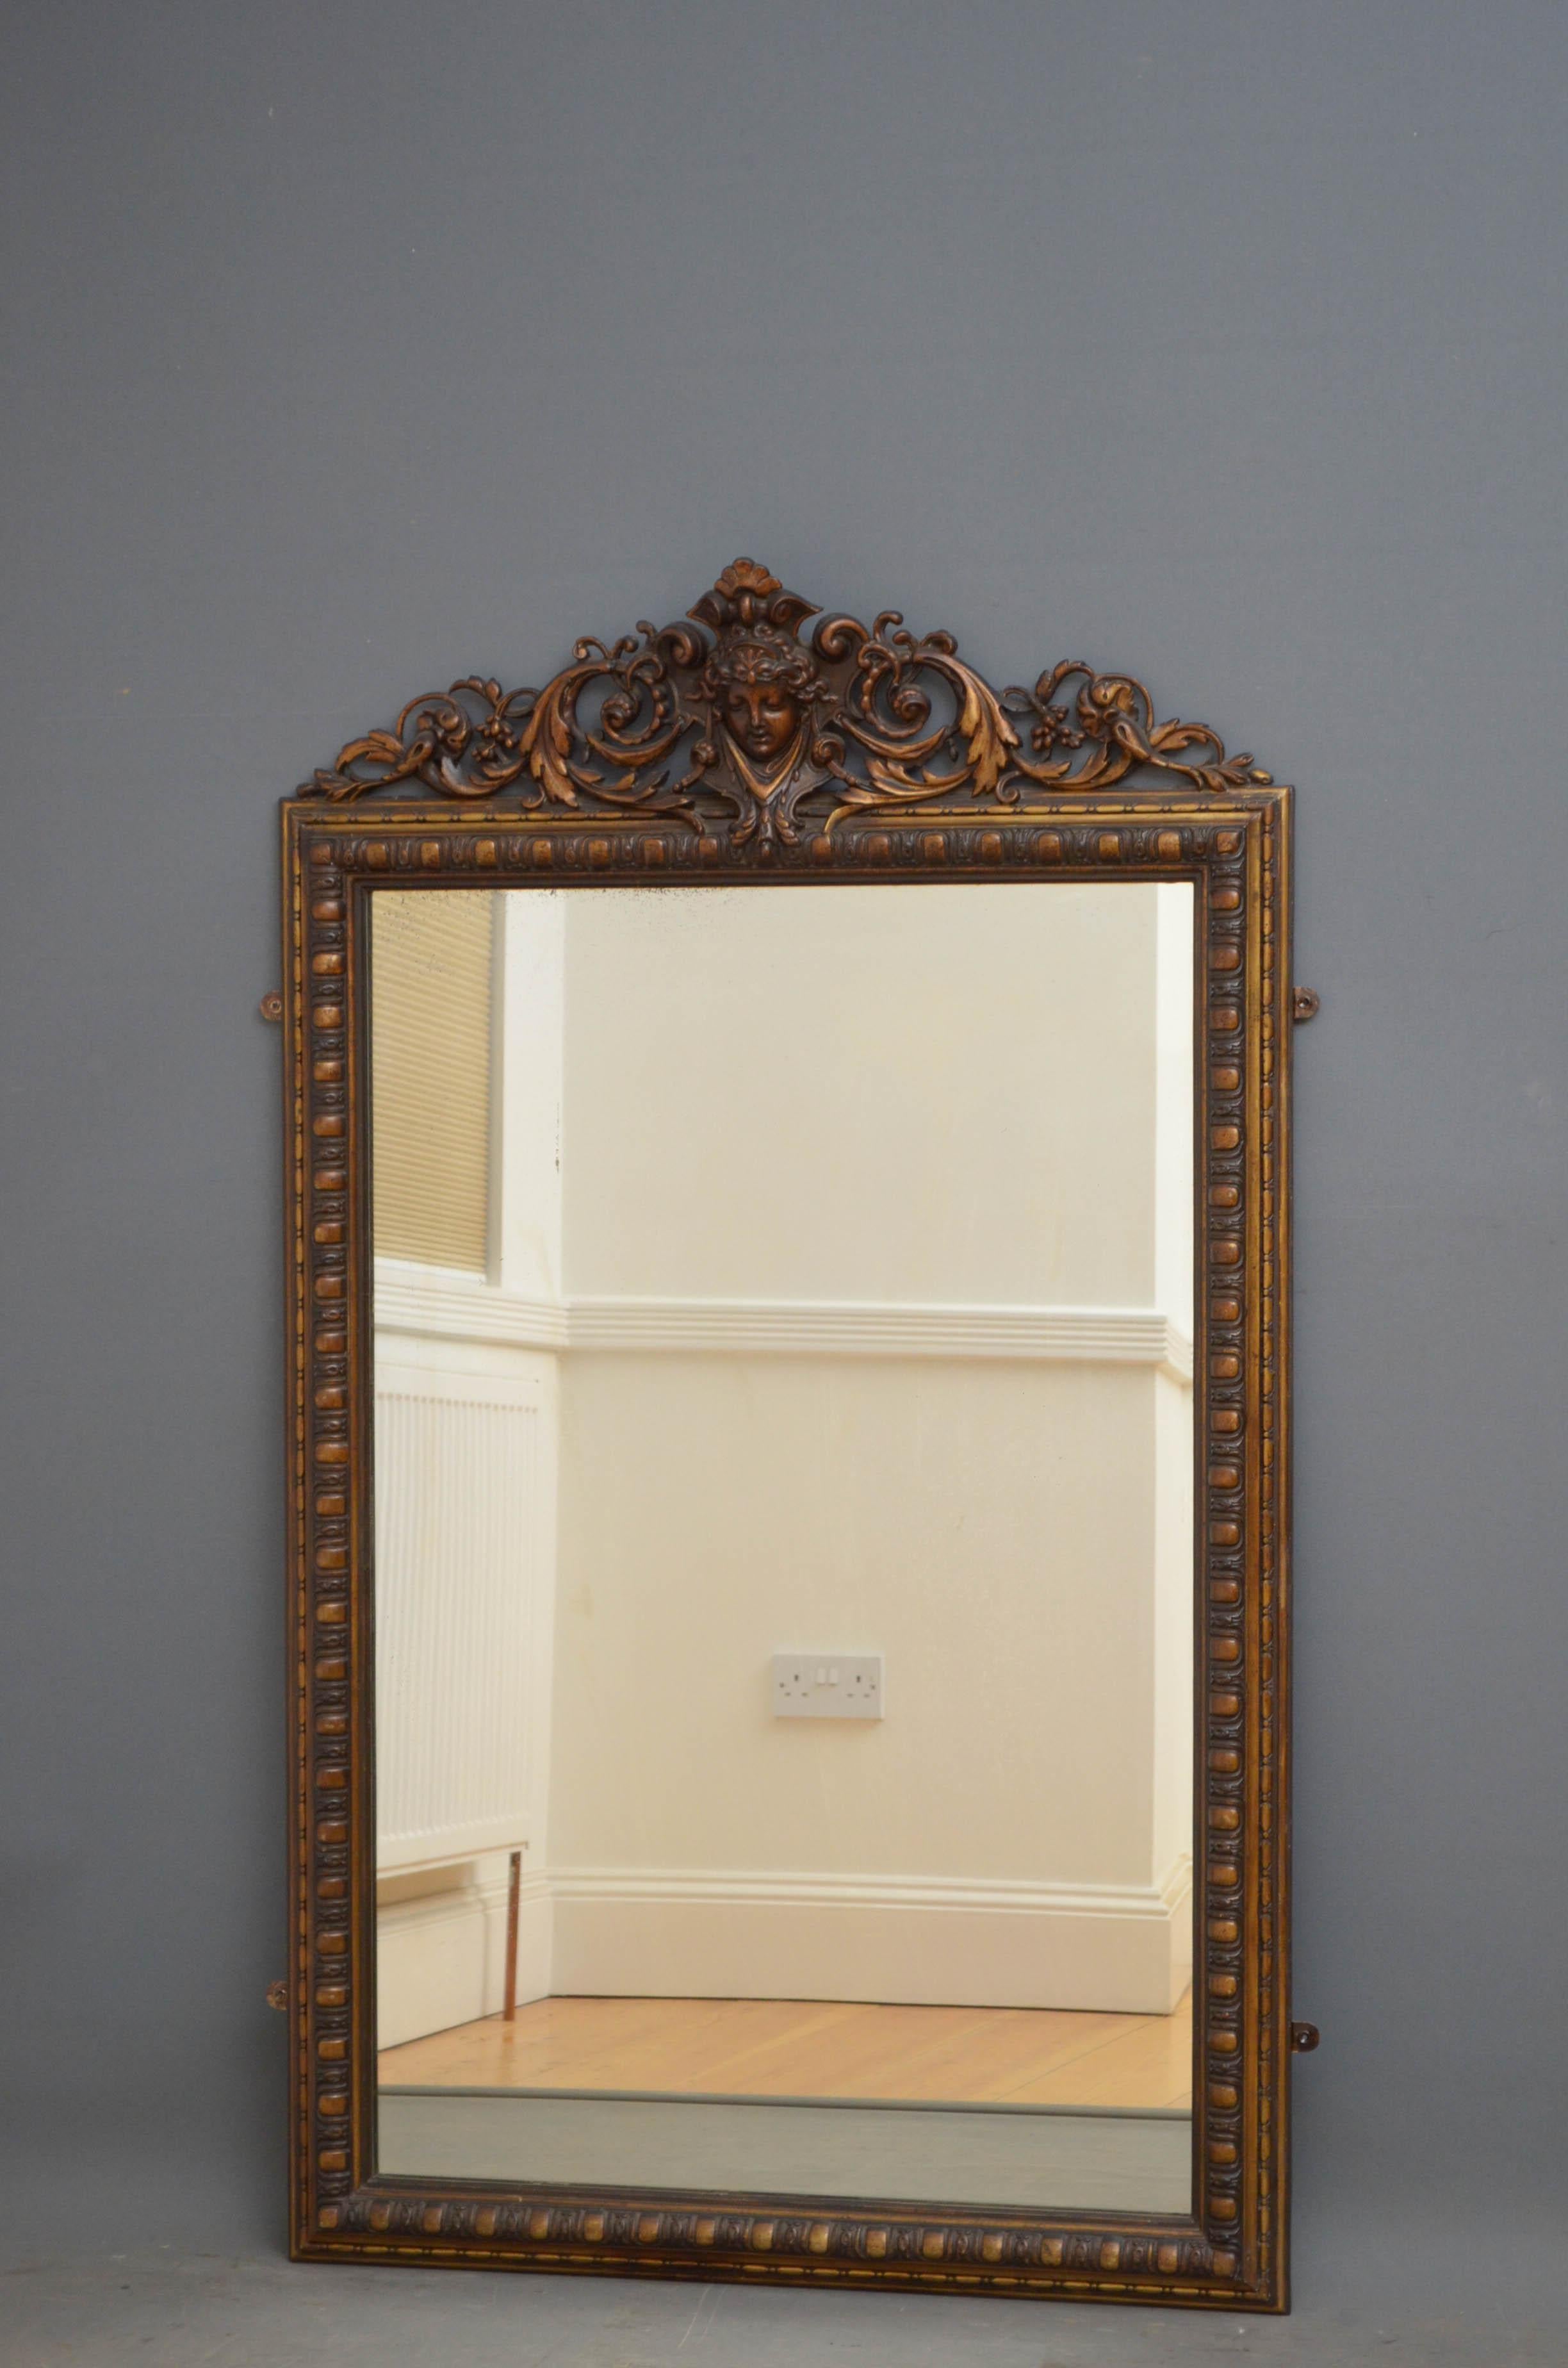 Sn4682 19th century wall mirror with original foxed glass in gadroon decorated frame with centre crest to the top. This antique mirror retains its original gilt with extensive patination. All in home ready condition, circa 1880.
Measures: H 57